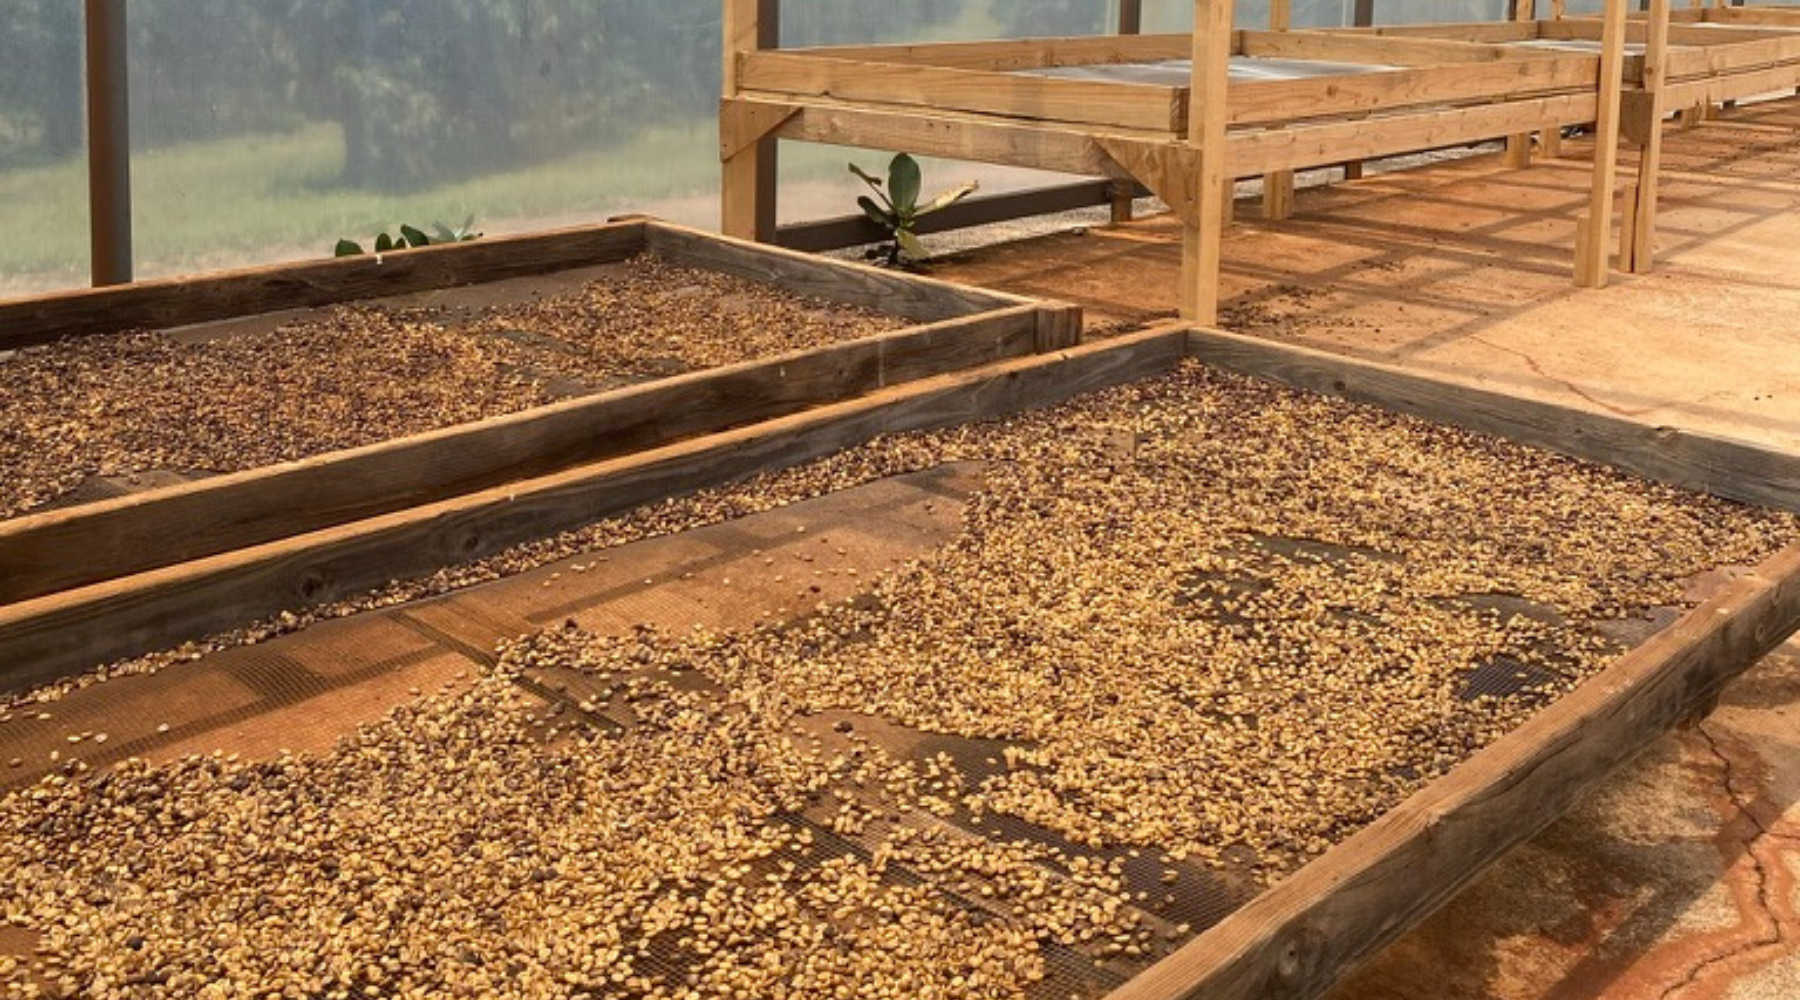 kauai coffee beans dry on an outdoor rack at the visitor center